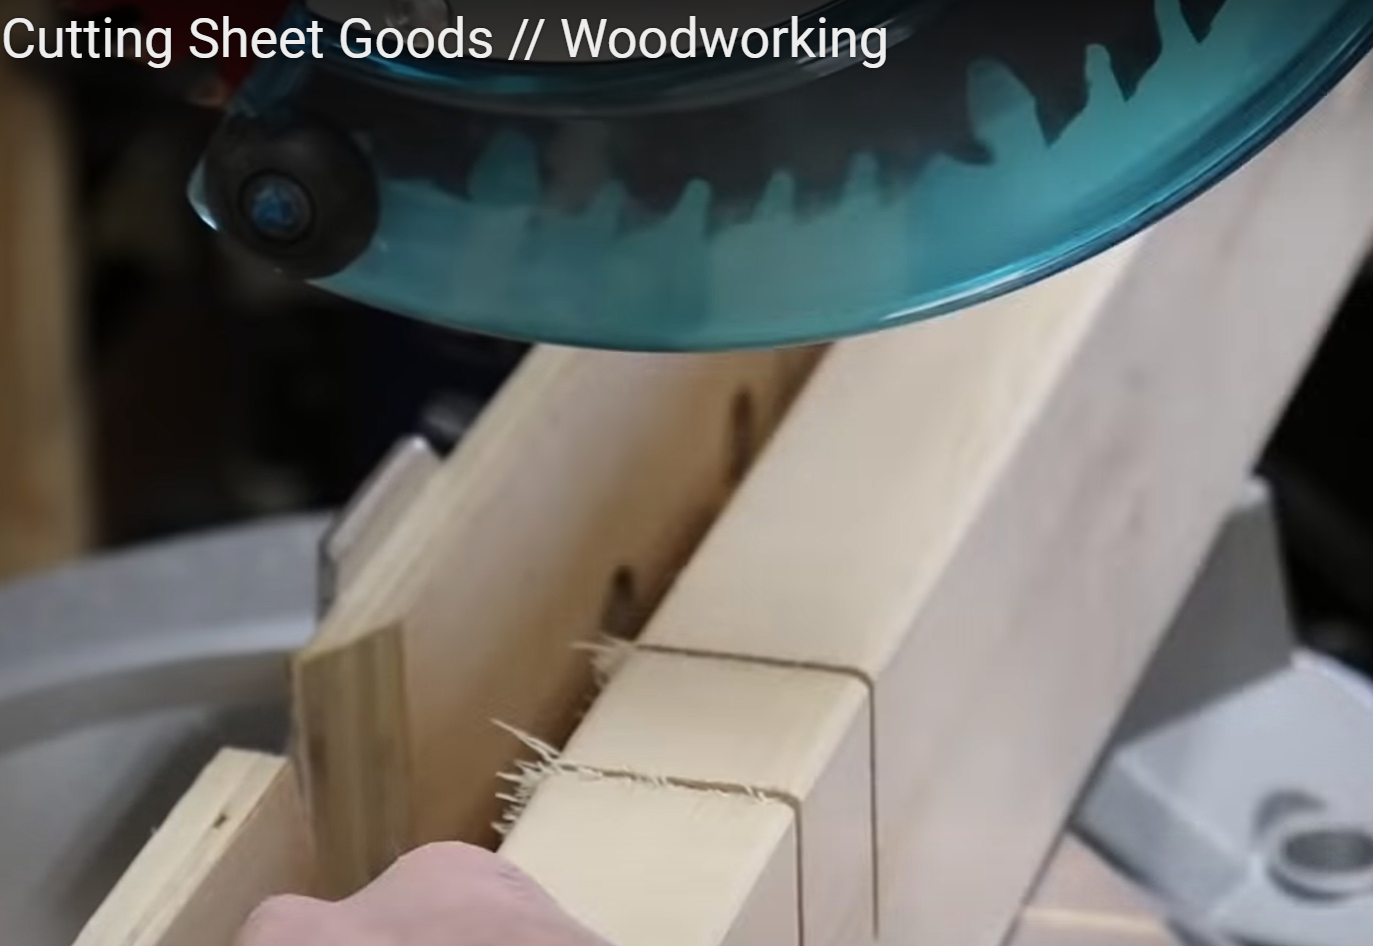 Measure twice, cut once - the art of precision cutting sheet goods